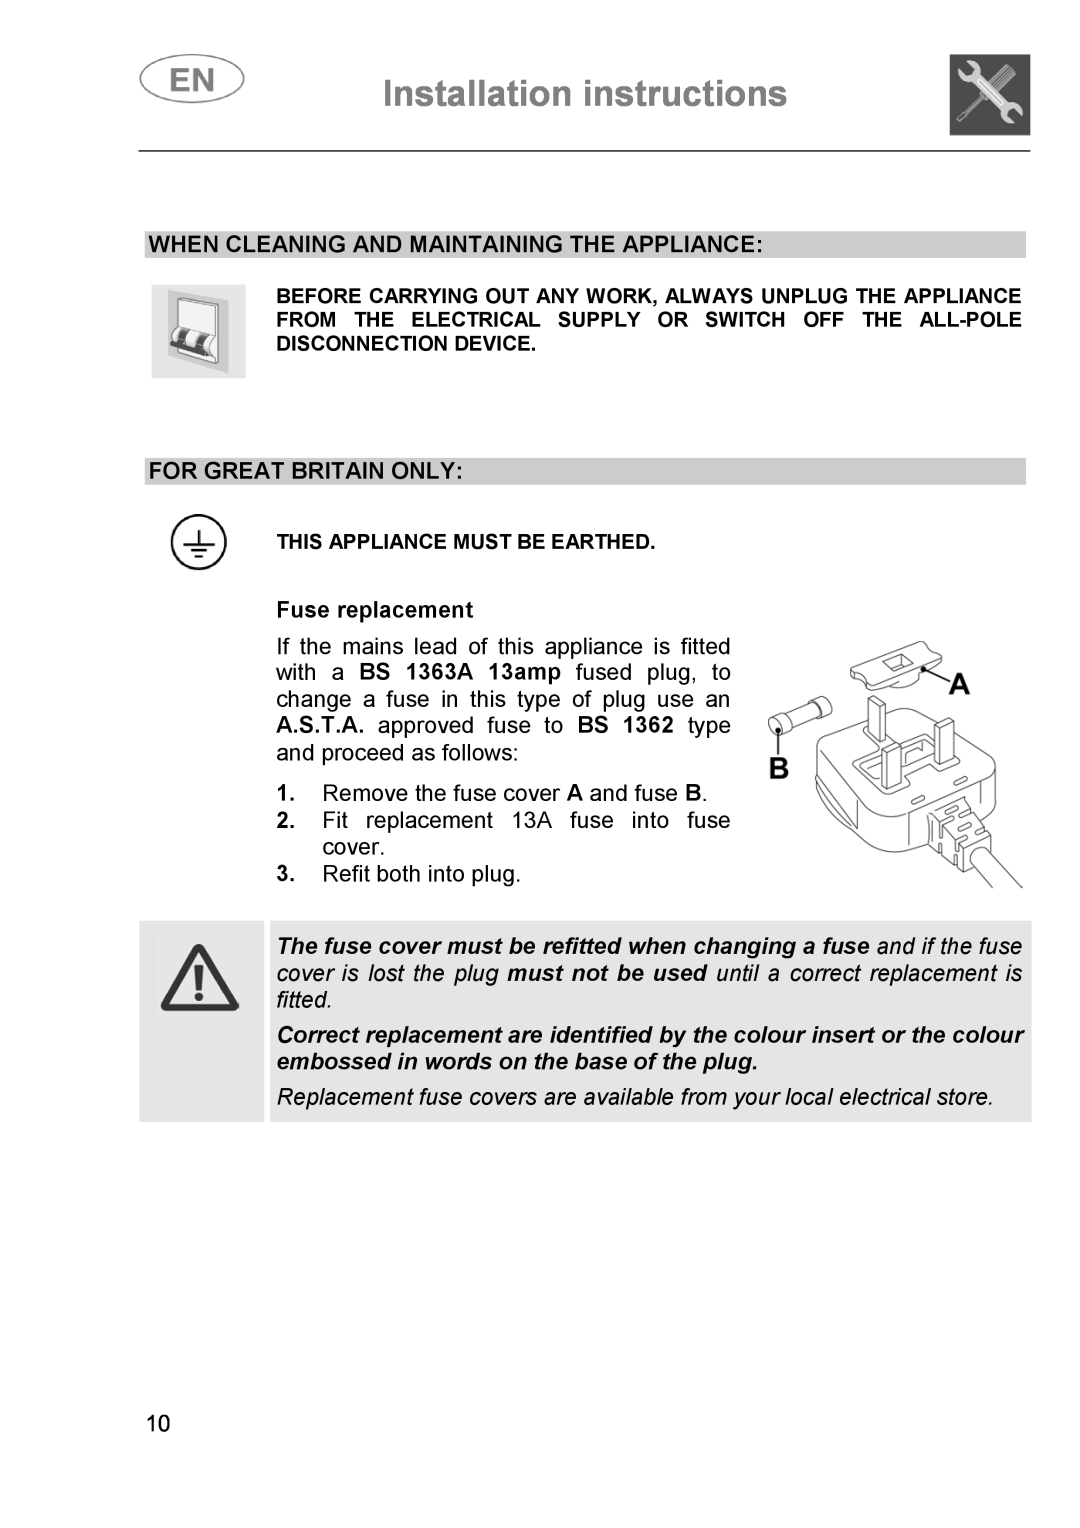 Smeg DI614H Installation instructions, When Cleaning And Maintaining The Appliance, For Great Britain Only 